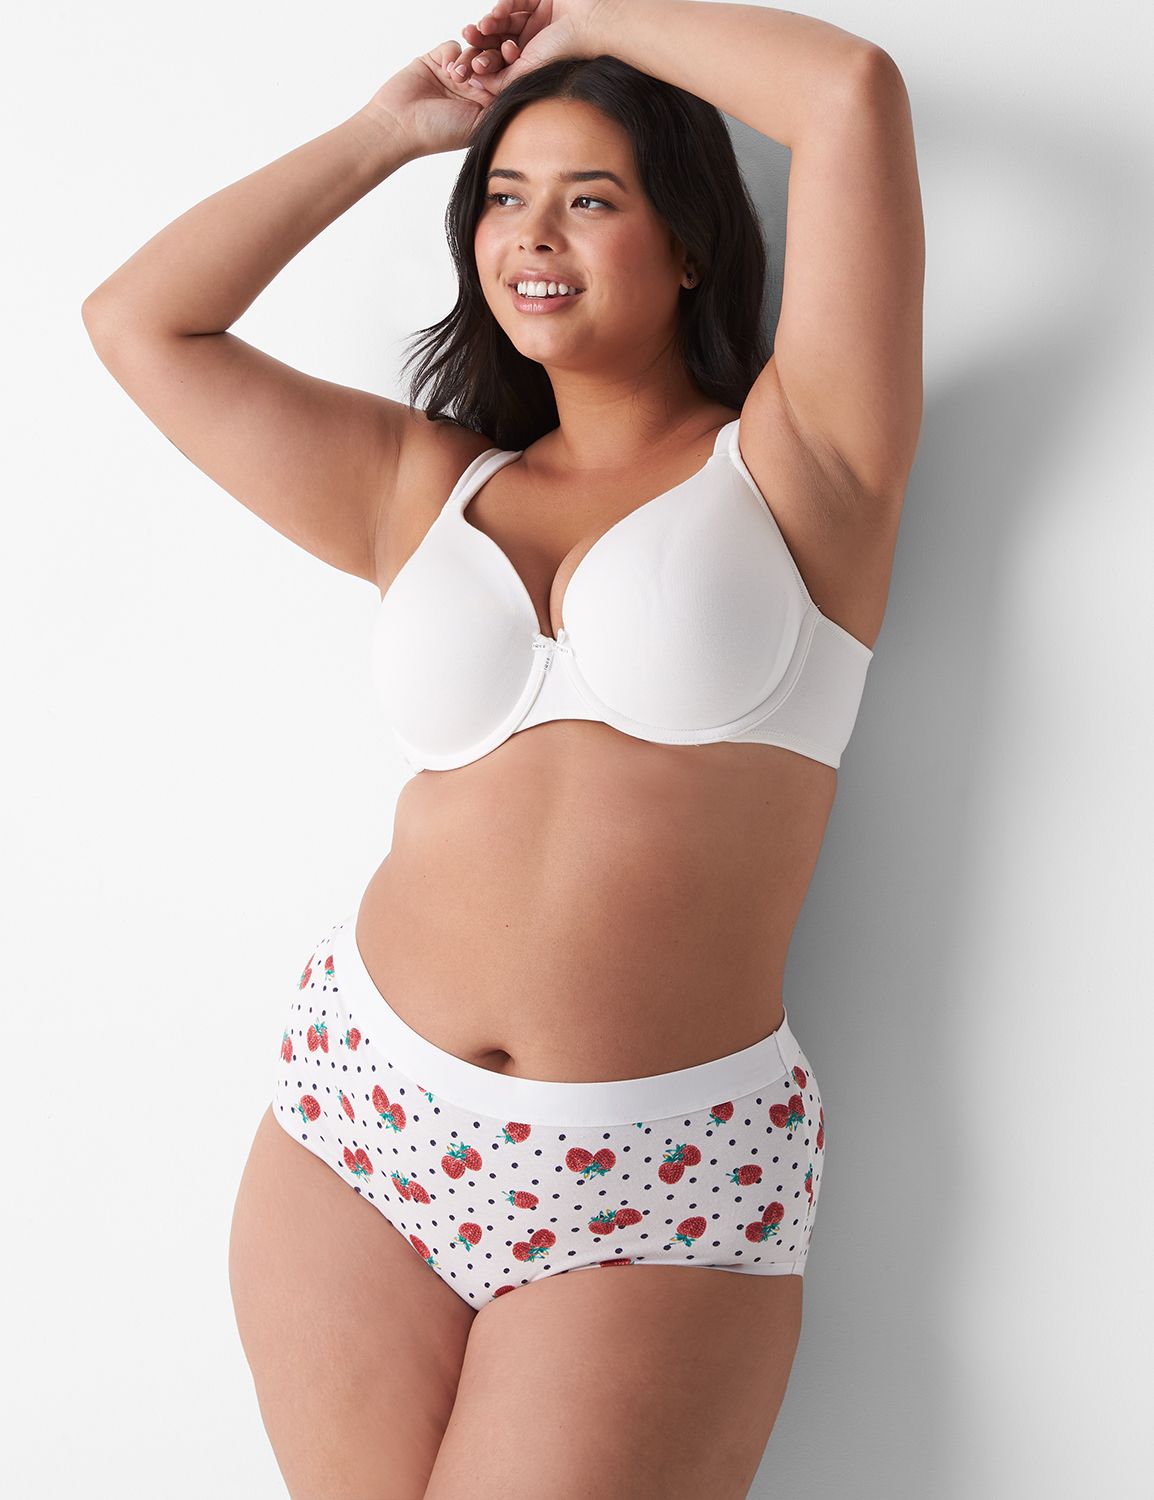 Lane Bryant's First-Ever Pride Collection Is Here and Adorably